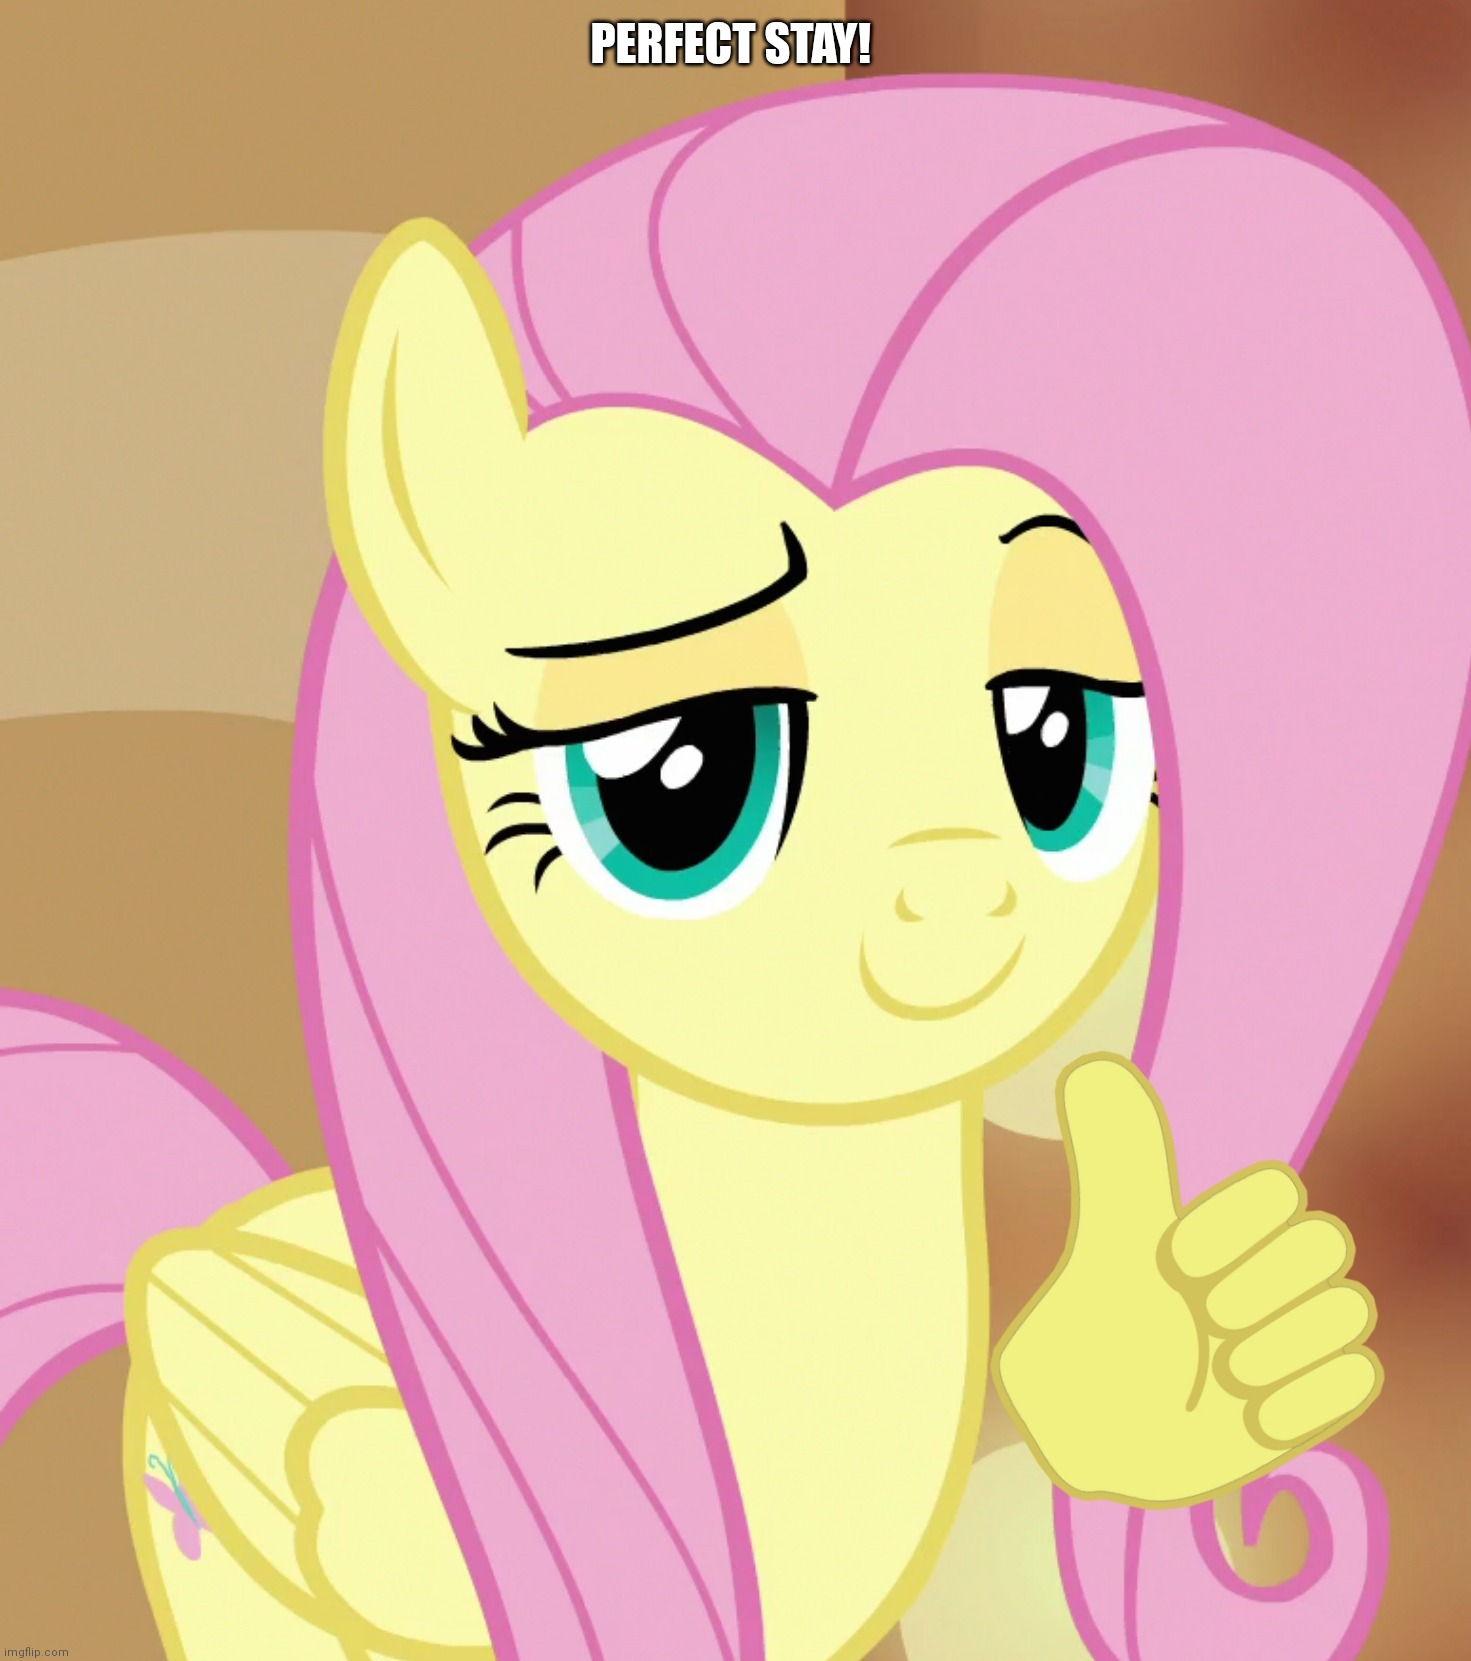 PERFECT STAY! | image tagged in fluttershy,thumbs up,my little pony,memes | made w/ Imgflip meme maker